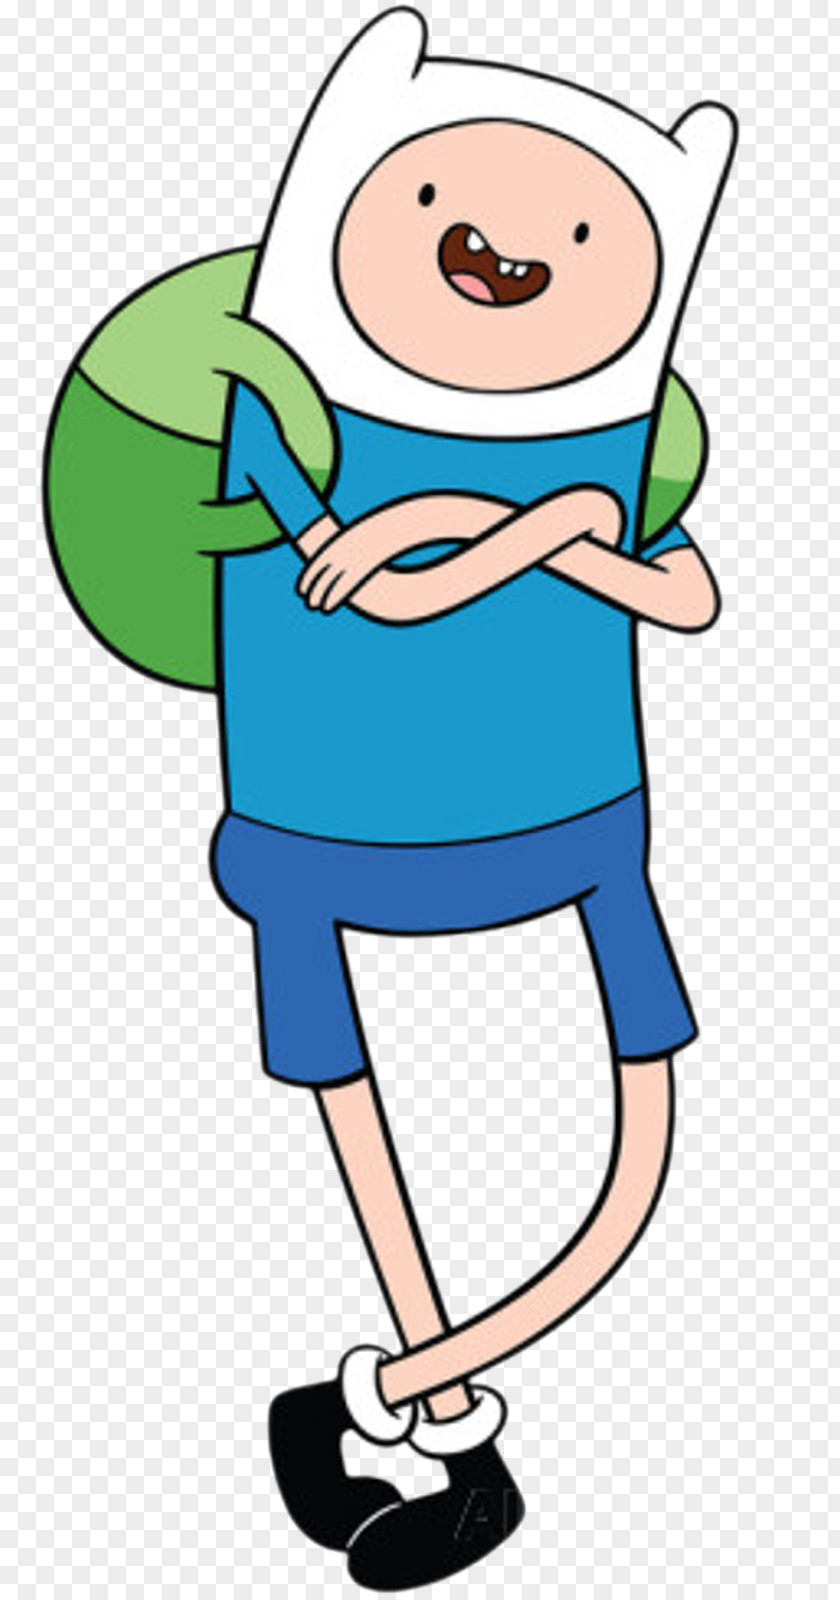 Cartoon Characters Finn The Human Jake Dog Marceline Vampire Queen Network Universe: FusionFall PNG